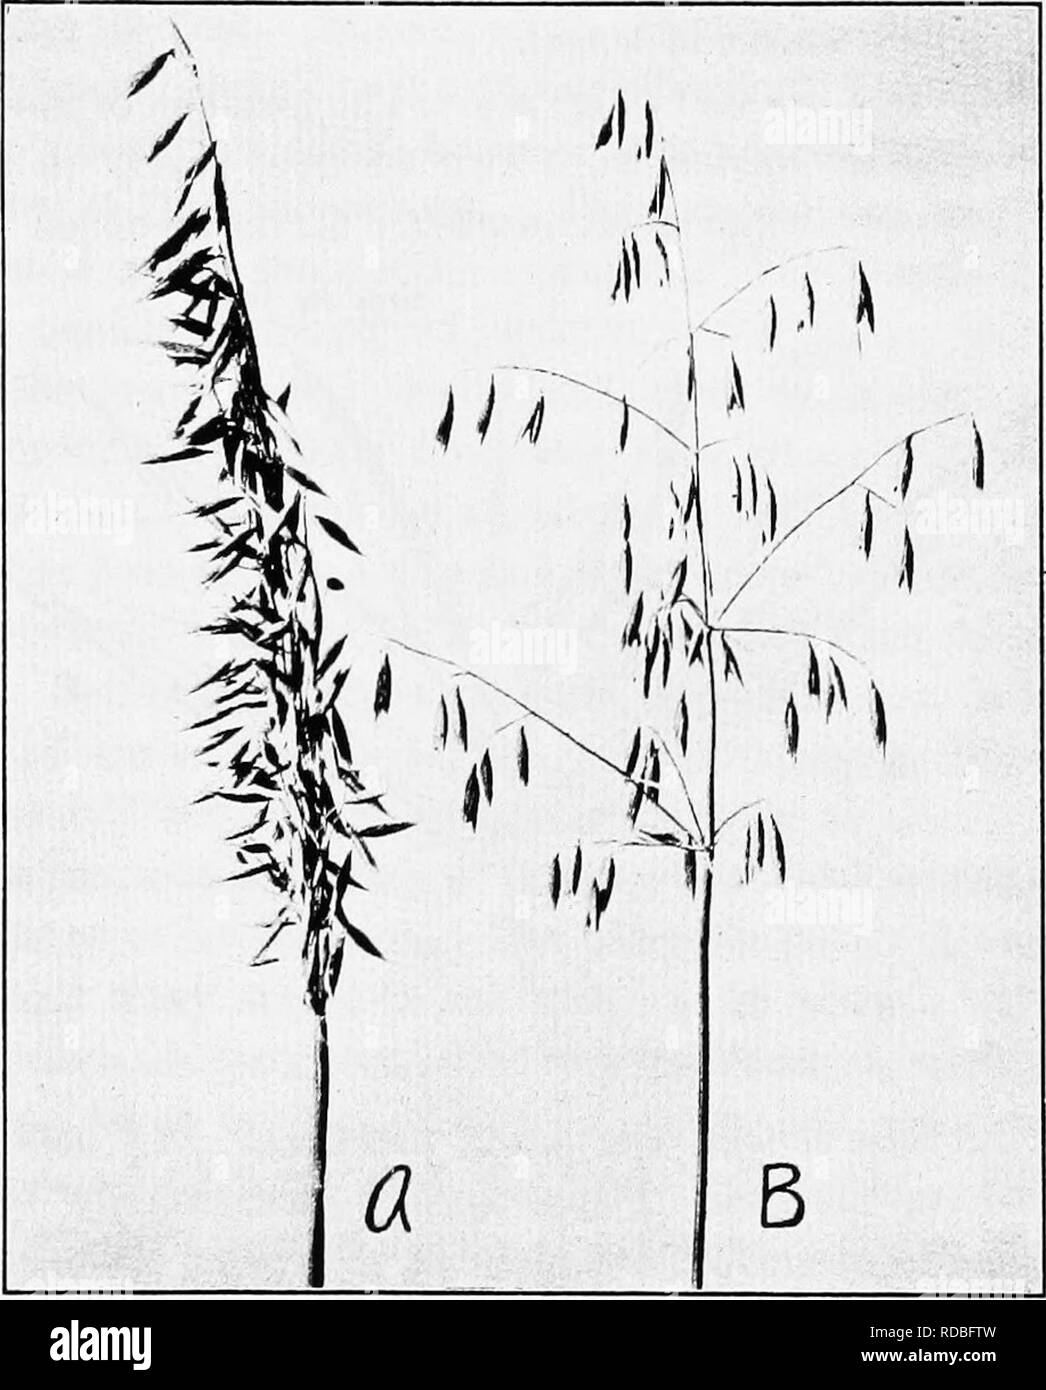 . The botany of crop plants : a text and reference book. Botany, Economic. AVENA 125 the others being branches of higher order, arising at the base of the primary. The branching decreases from bottom to top. In banner oats {Avena orientalis), the panicle is one- sided. In ordinary panicle or spreading oats {Avena sativa),. Fig. 45.—A, contracted, one-sided panicle of banner oats (Avena orientalis); B, spreading inflorescence of panicle oats (Avena sativa). the branches spread toward all sides (Fig. 45). Four main types of panicle oats have been distinguished at the Svalof Experiment Station, a Stock Photo